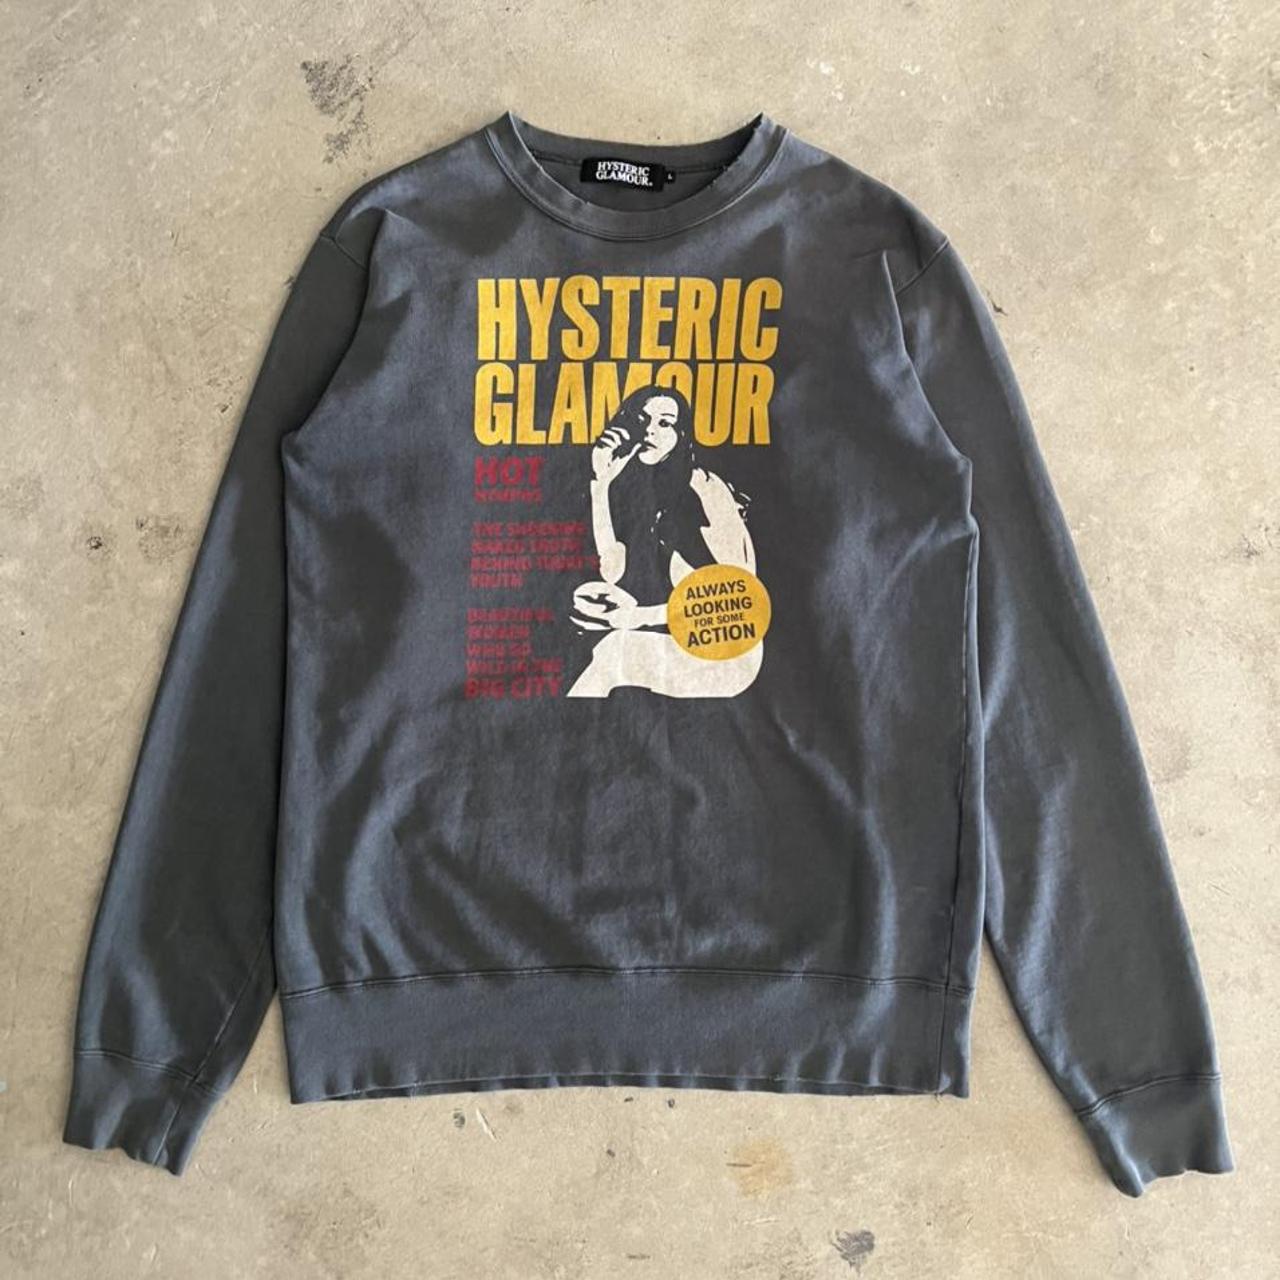 Product Image 1 - Hysteric Glamour “Hot Nymphs”
Long sleeve